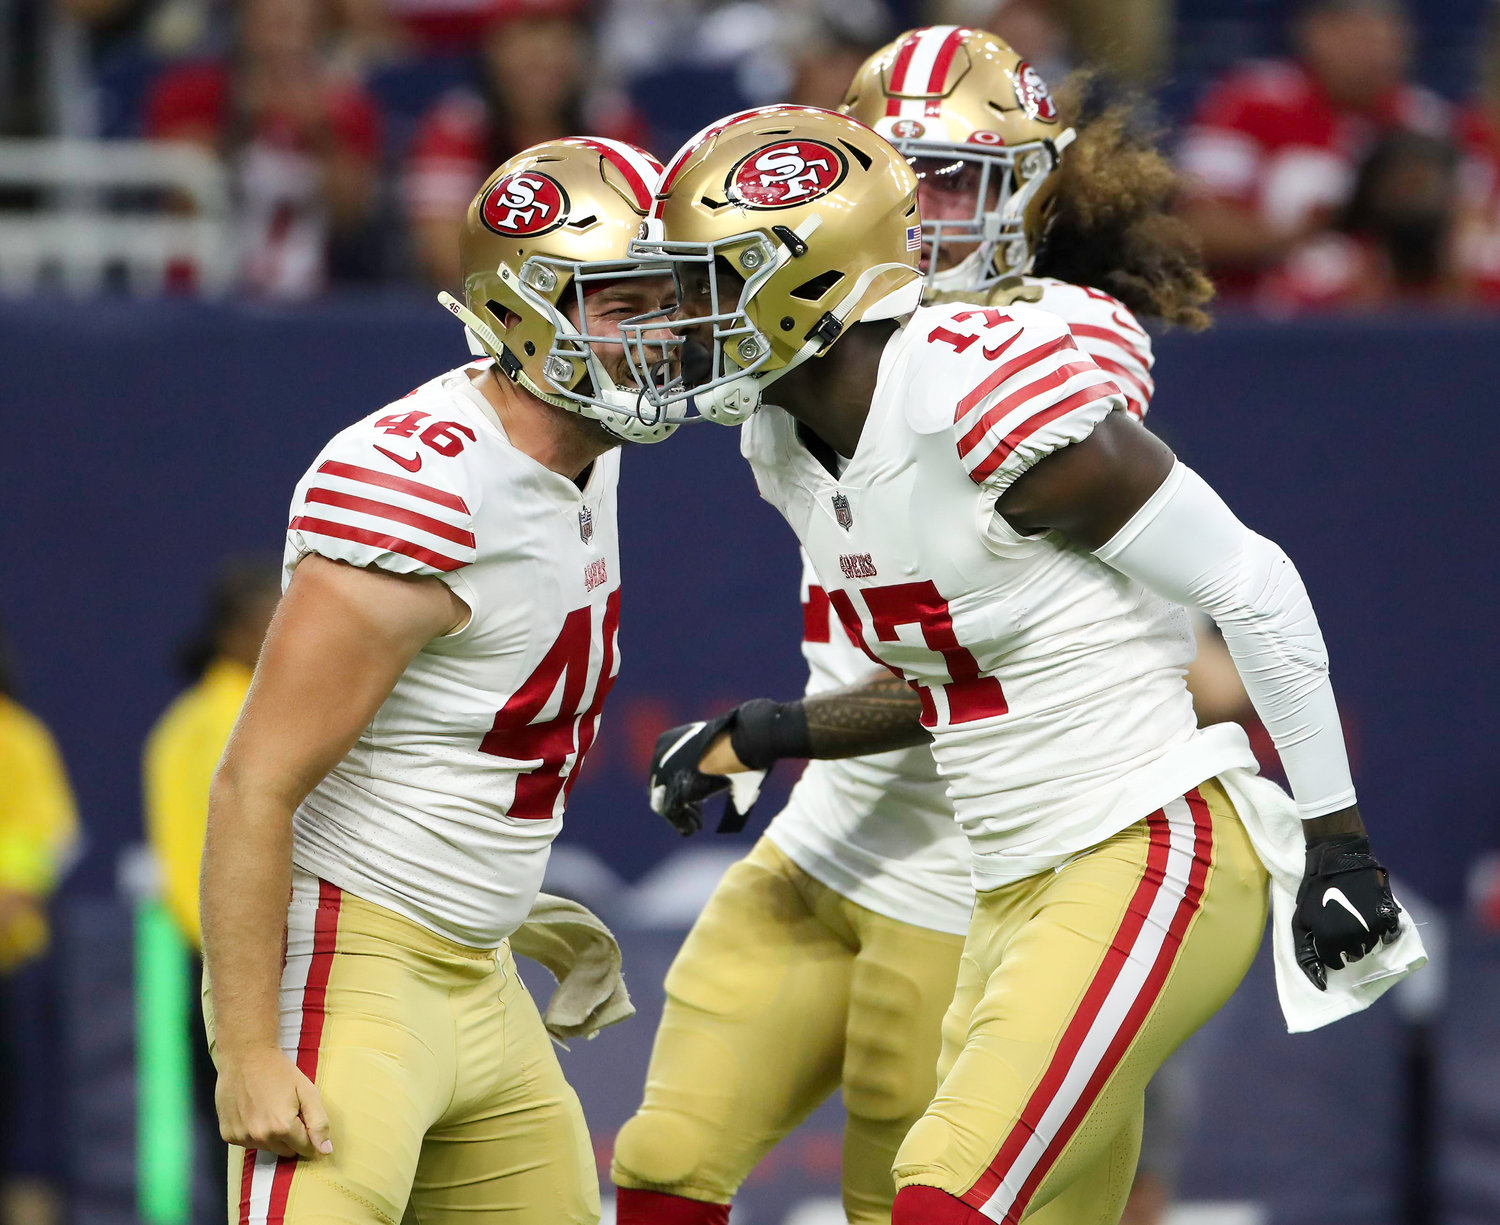 San Francisco 49ers long snapper Taybor Pepper (46) and wide receiver Malik Turner (17) celebrate after a big hit on a punt return during an NFL preseason game between the Texans and the 49ers in Houston, Texas, on August 25, 2022.